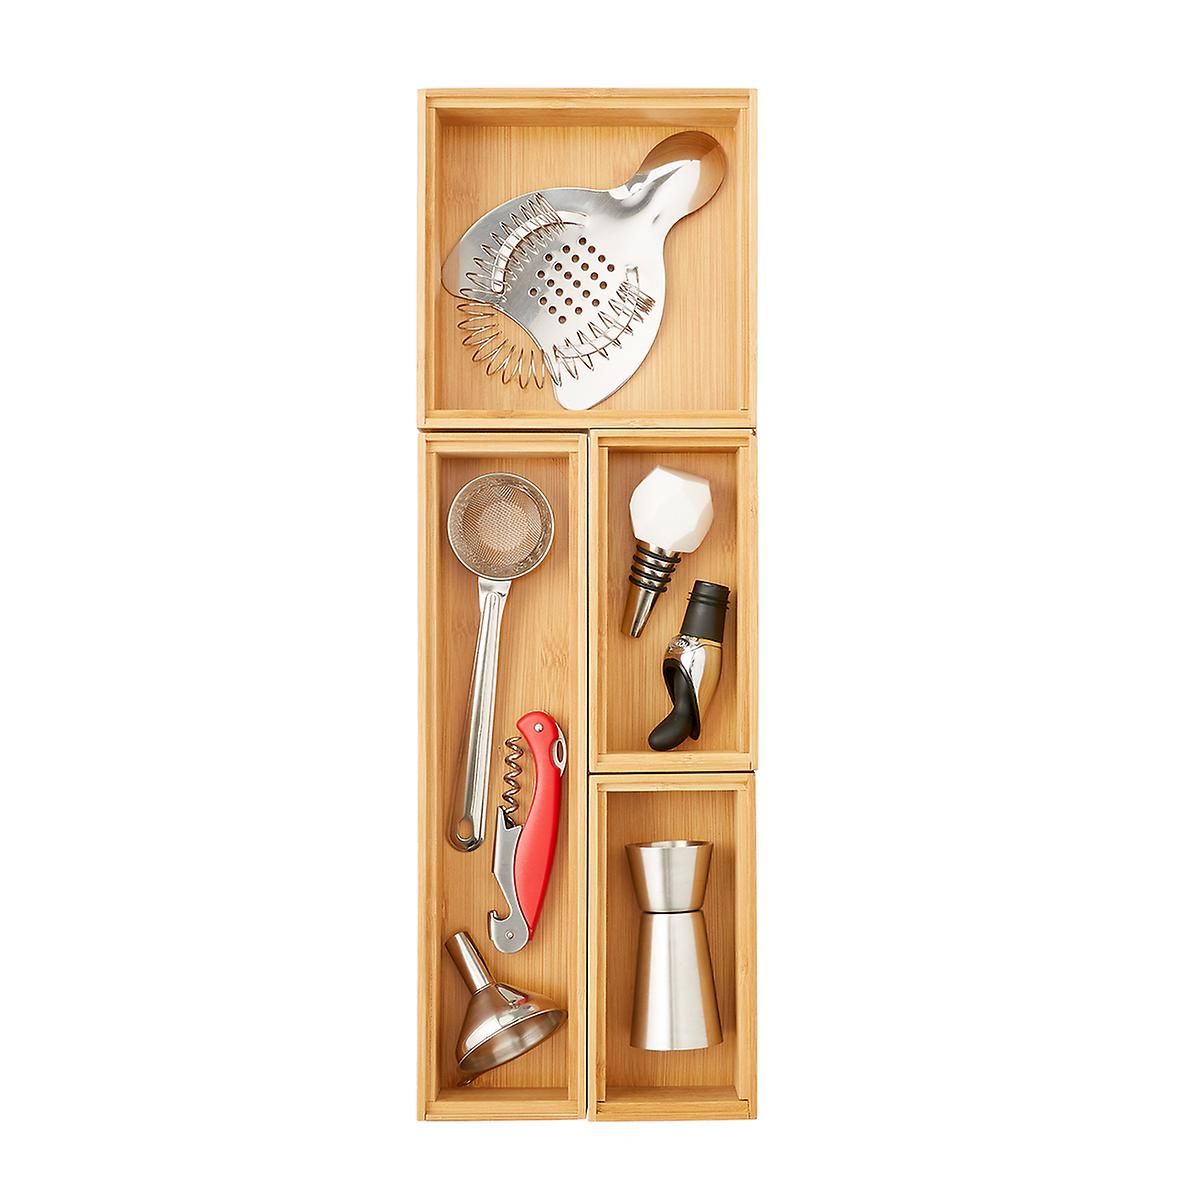 6" X 18" Bamboo Drawer Organizer Starter Kit | The Container Store